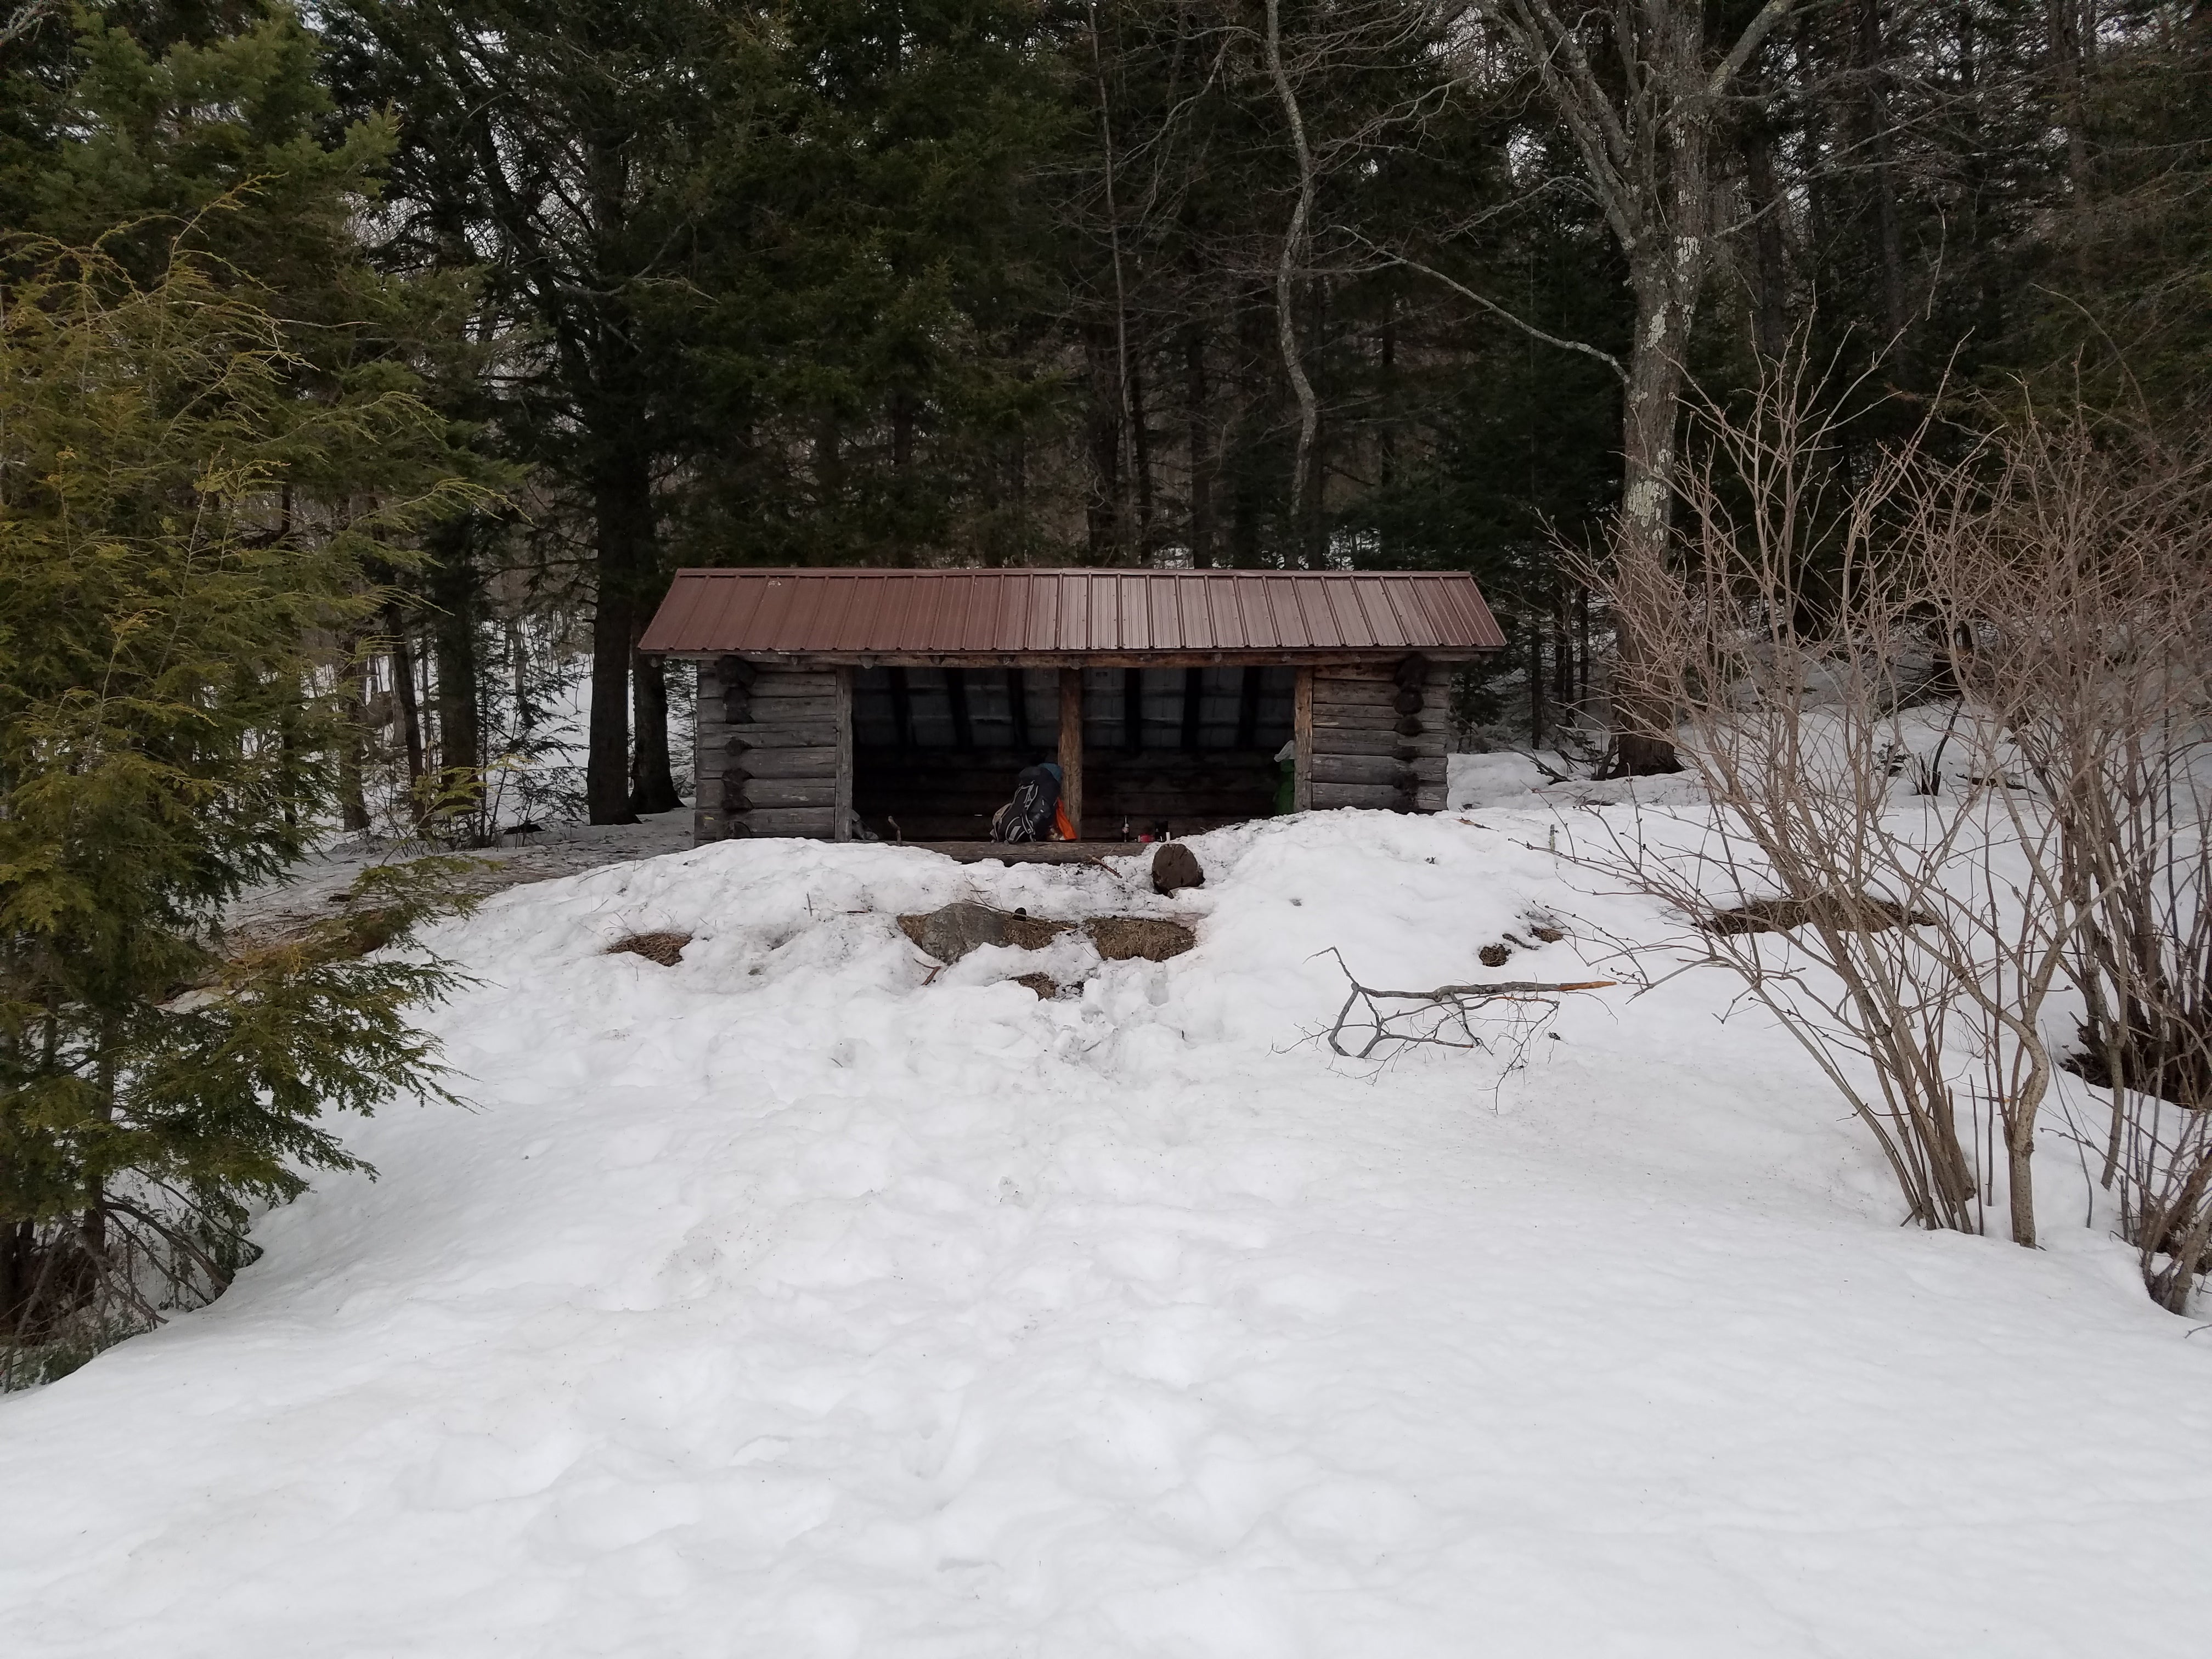 Camper submitted image from Sawyer Pond - 4